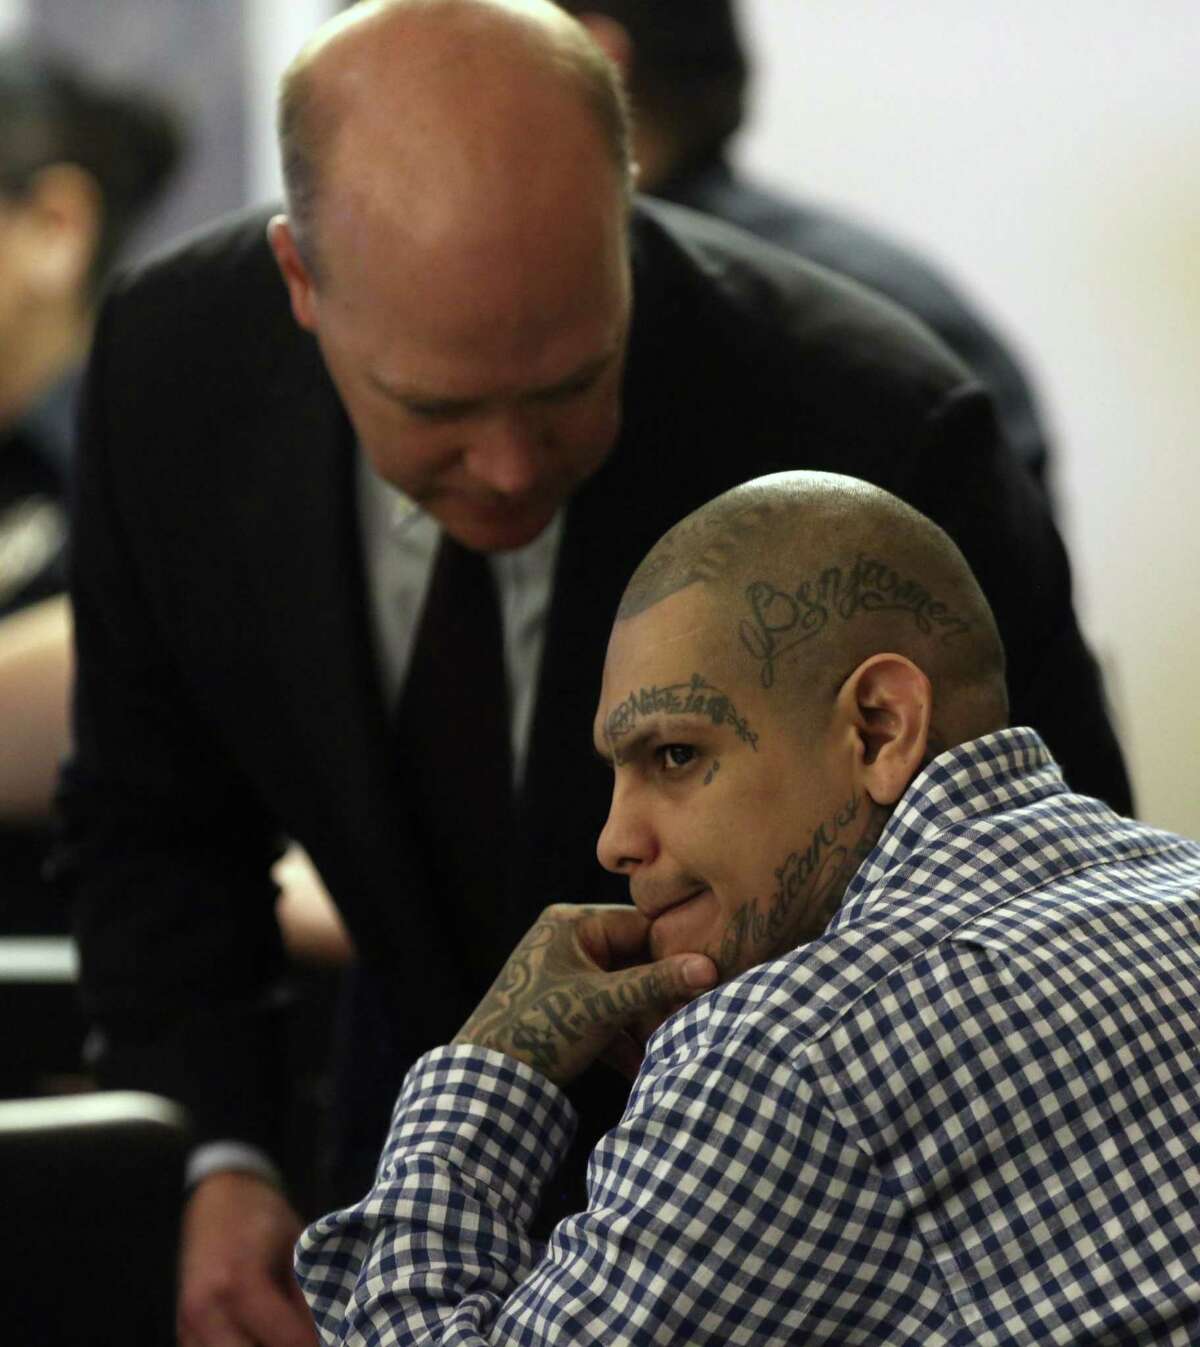 Gabriel Moreno, right, looks Tuesday, March 6, 2018 around the courtroom during a break in his murder trial. Moreno is accused in the beating and dismemberment of Jose Luis Menchaca in 2014.